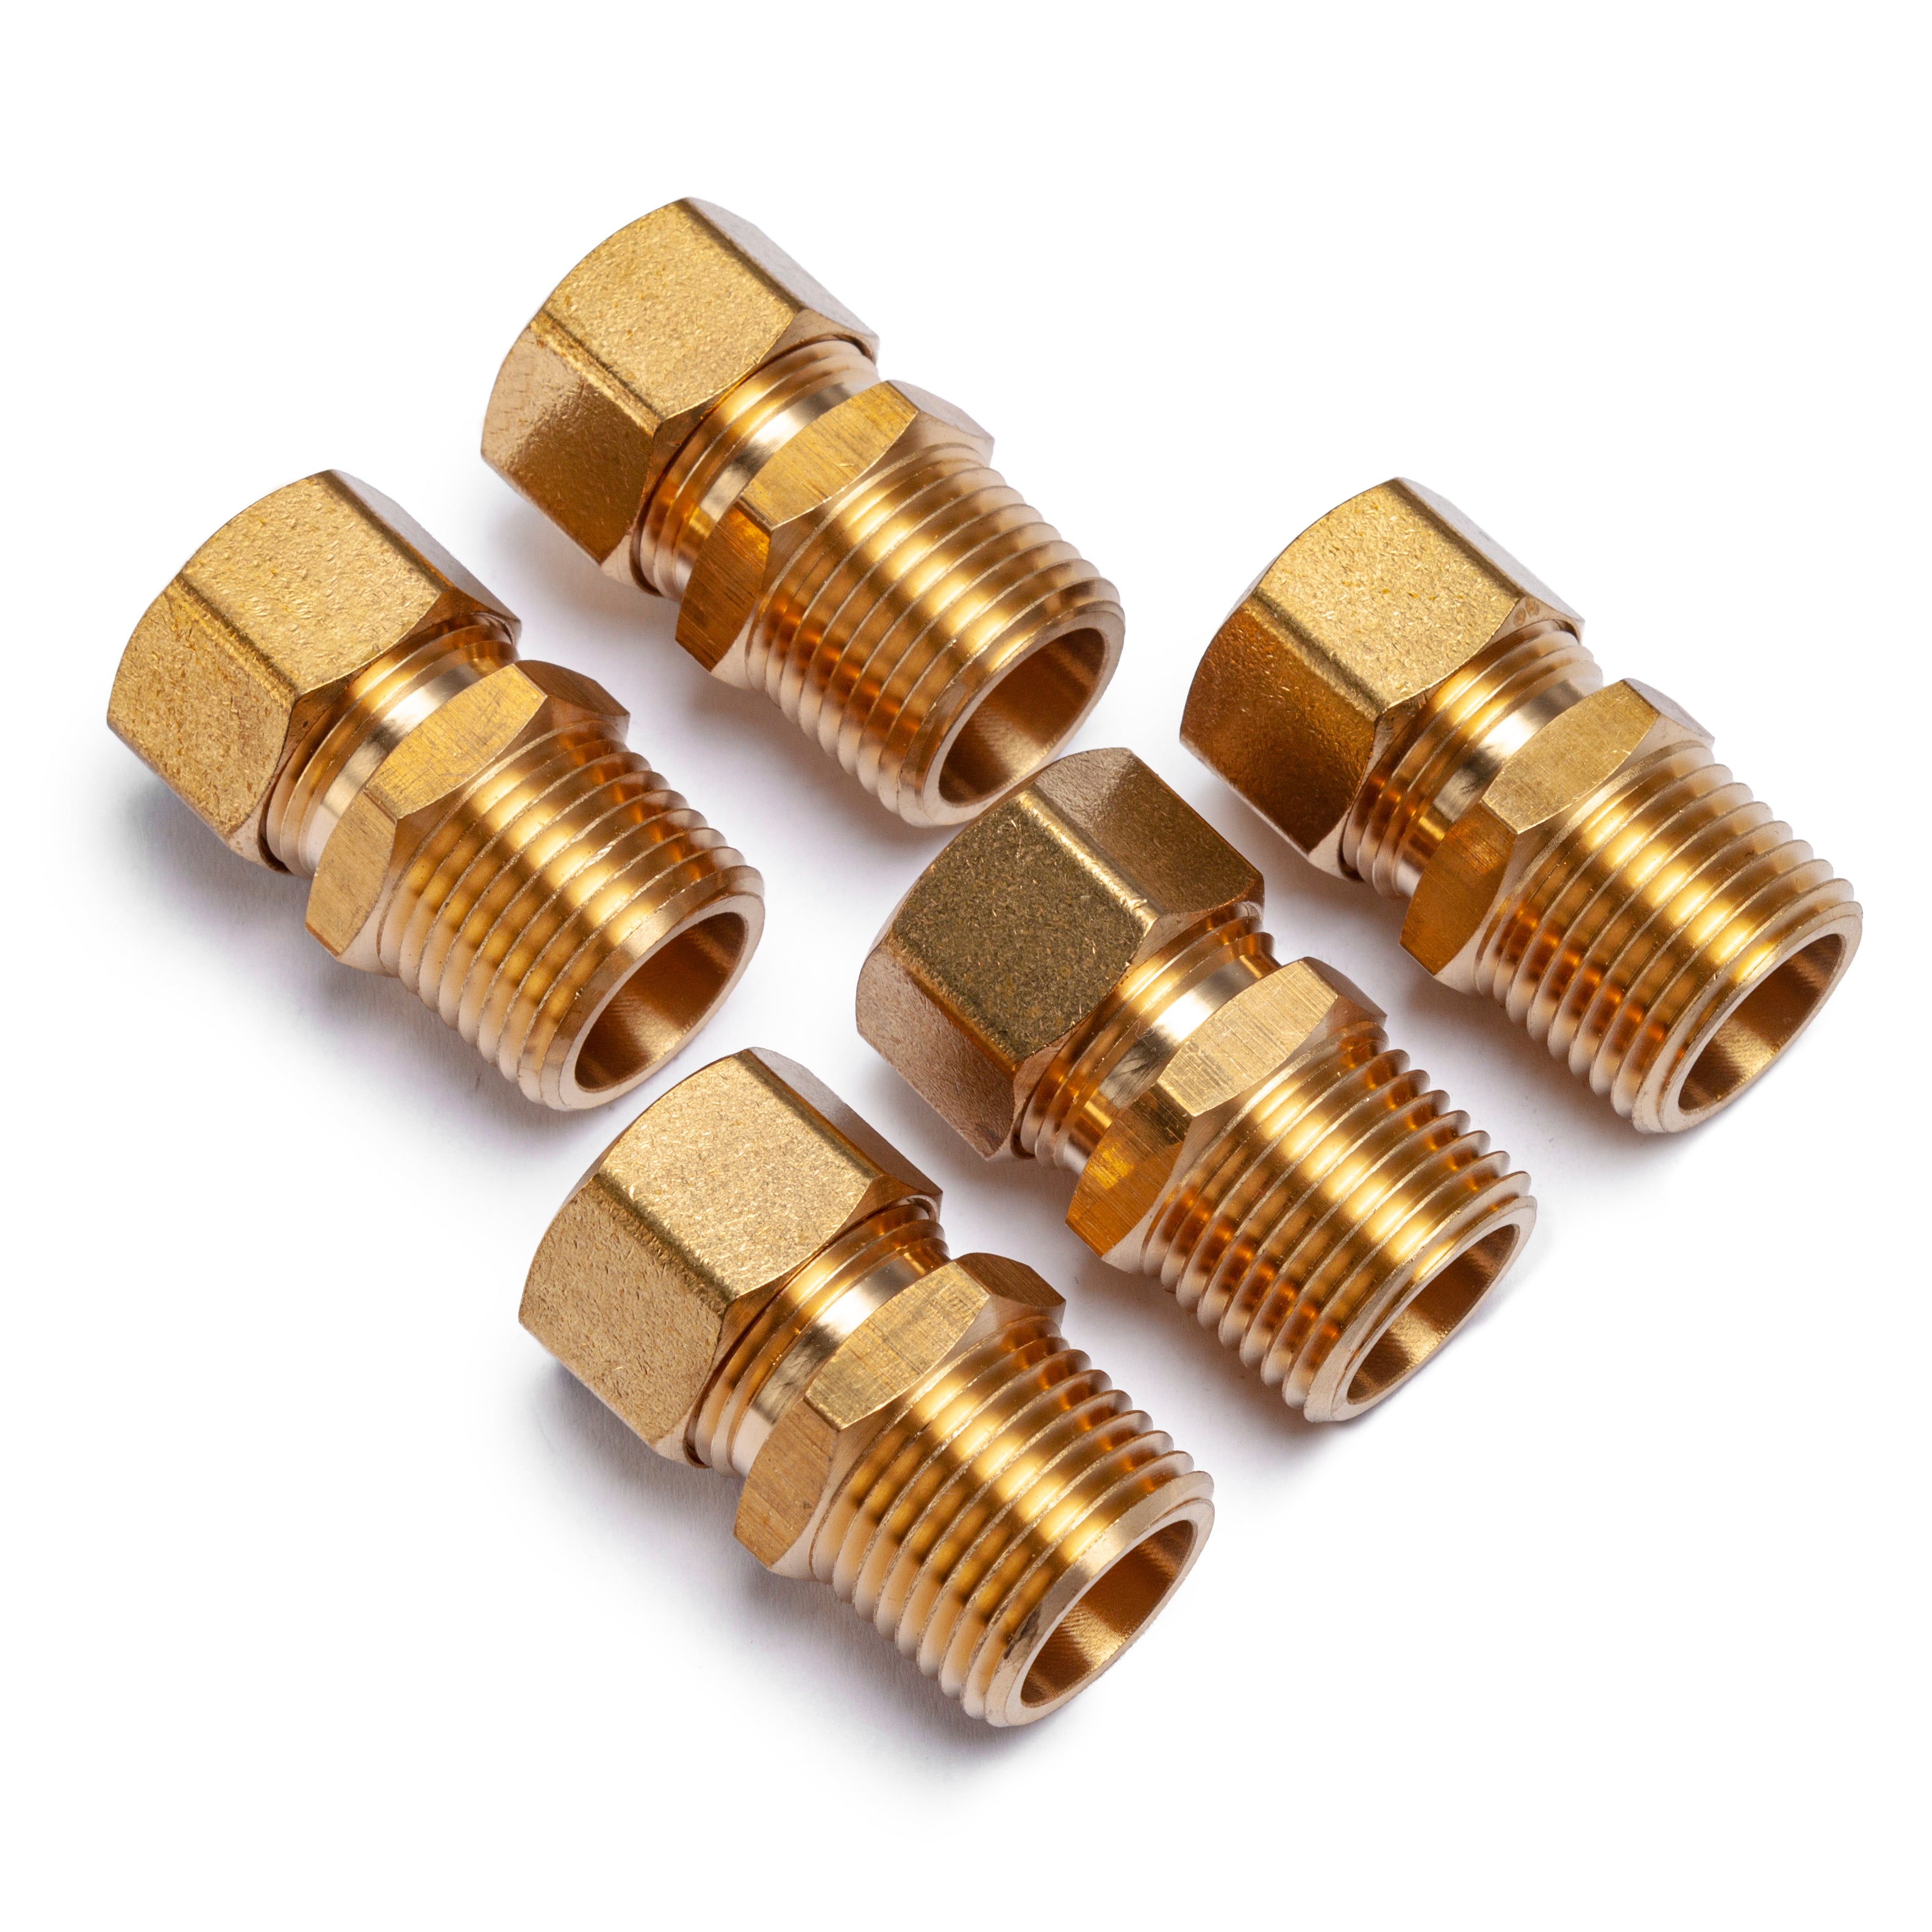 LTWFITTING Brass 5/8-Inch OD x 1/2-Inch Male NPT Compression Connector Fitting(Pack of 5)